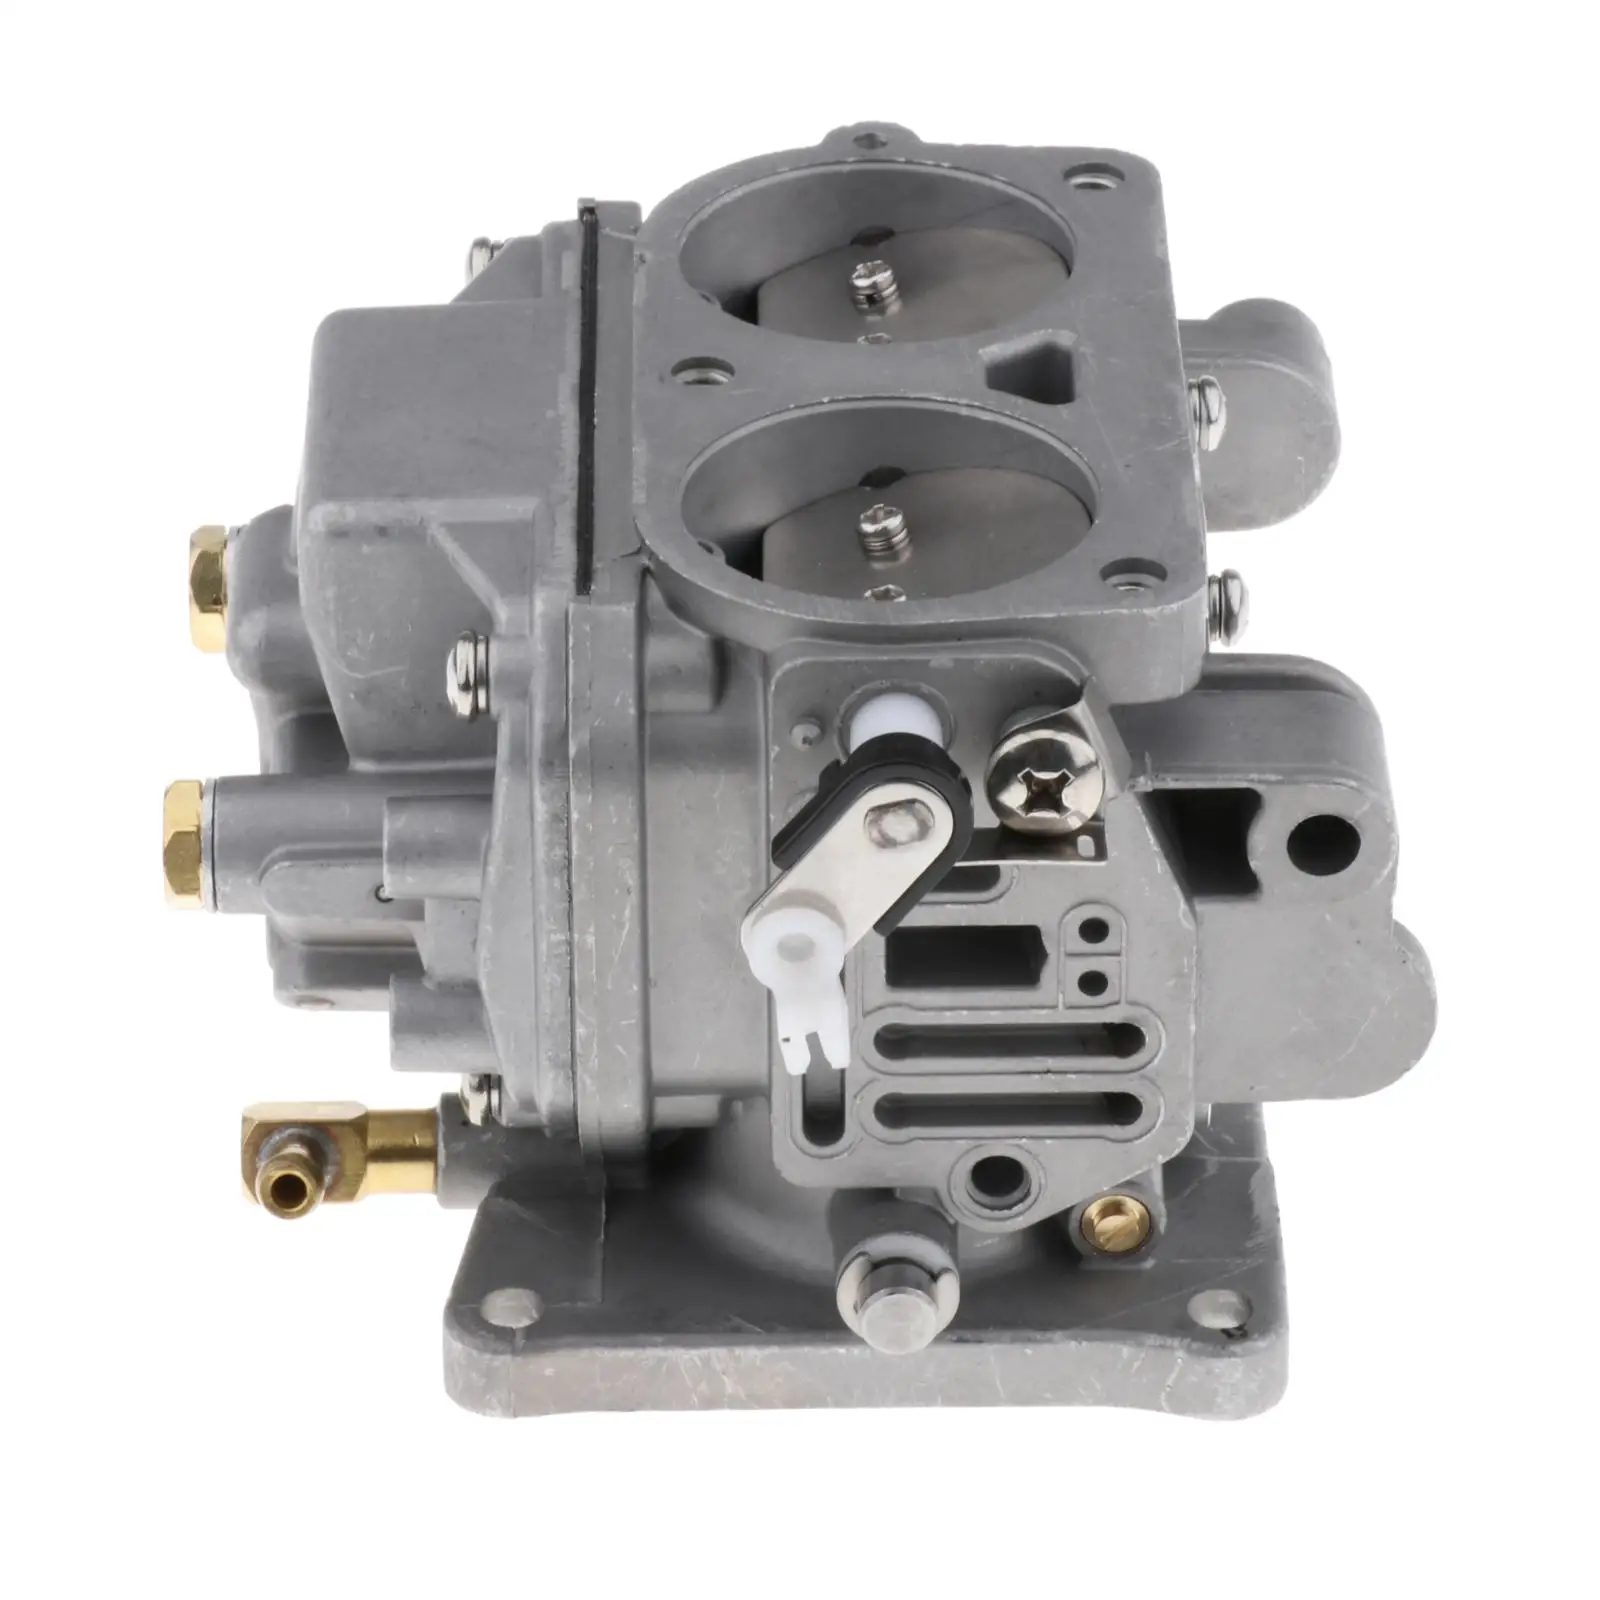 Carburetor Carburetor for  40HP J 1986 1993 for Chinese Parsun T36J T40J Outboard Motor Replace 6F6 14 301 00 6F5 14 301 00